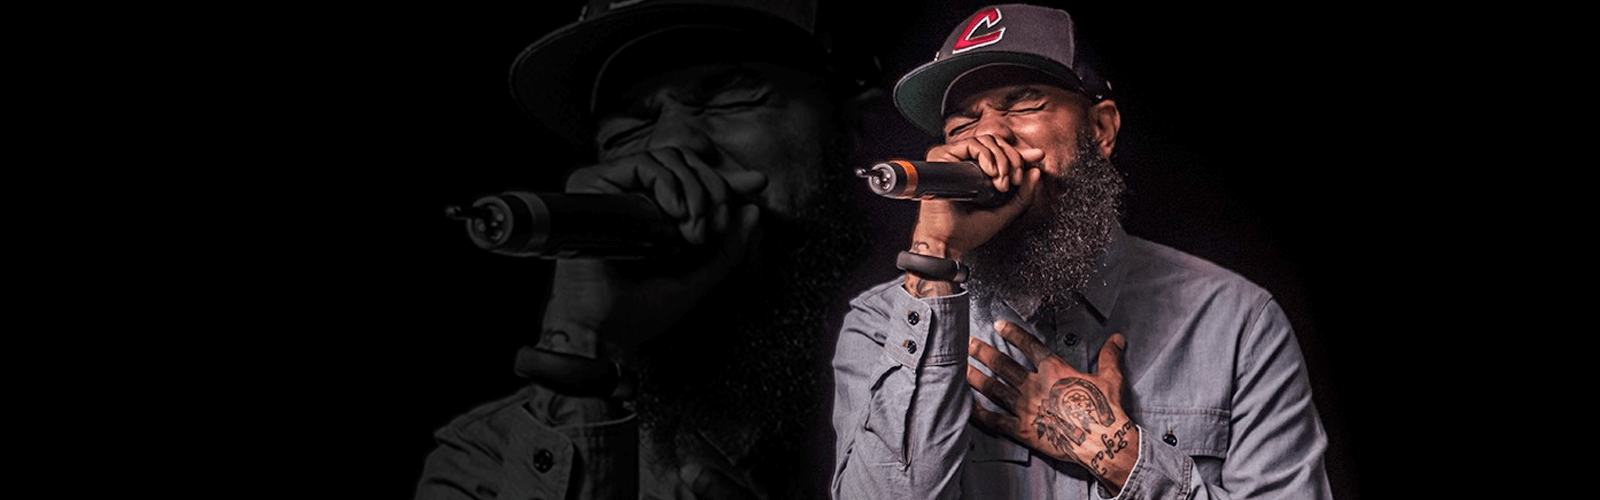 Stalley in 2012.image is sourced from Wikipedia.No copyright infringement intended